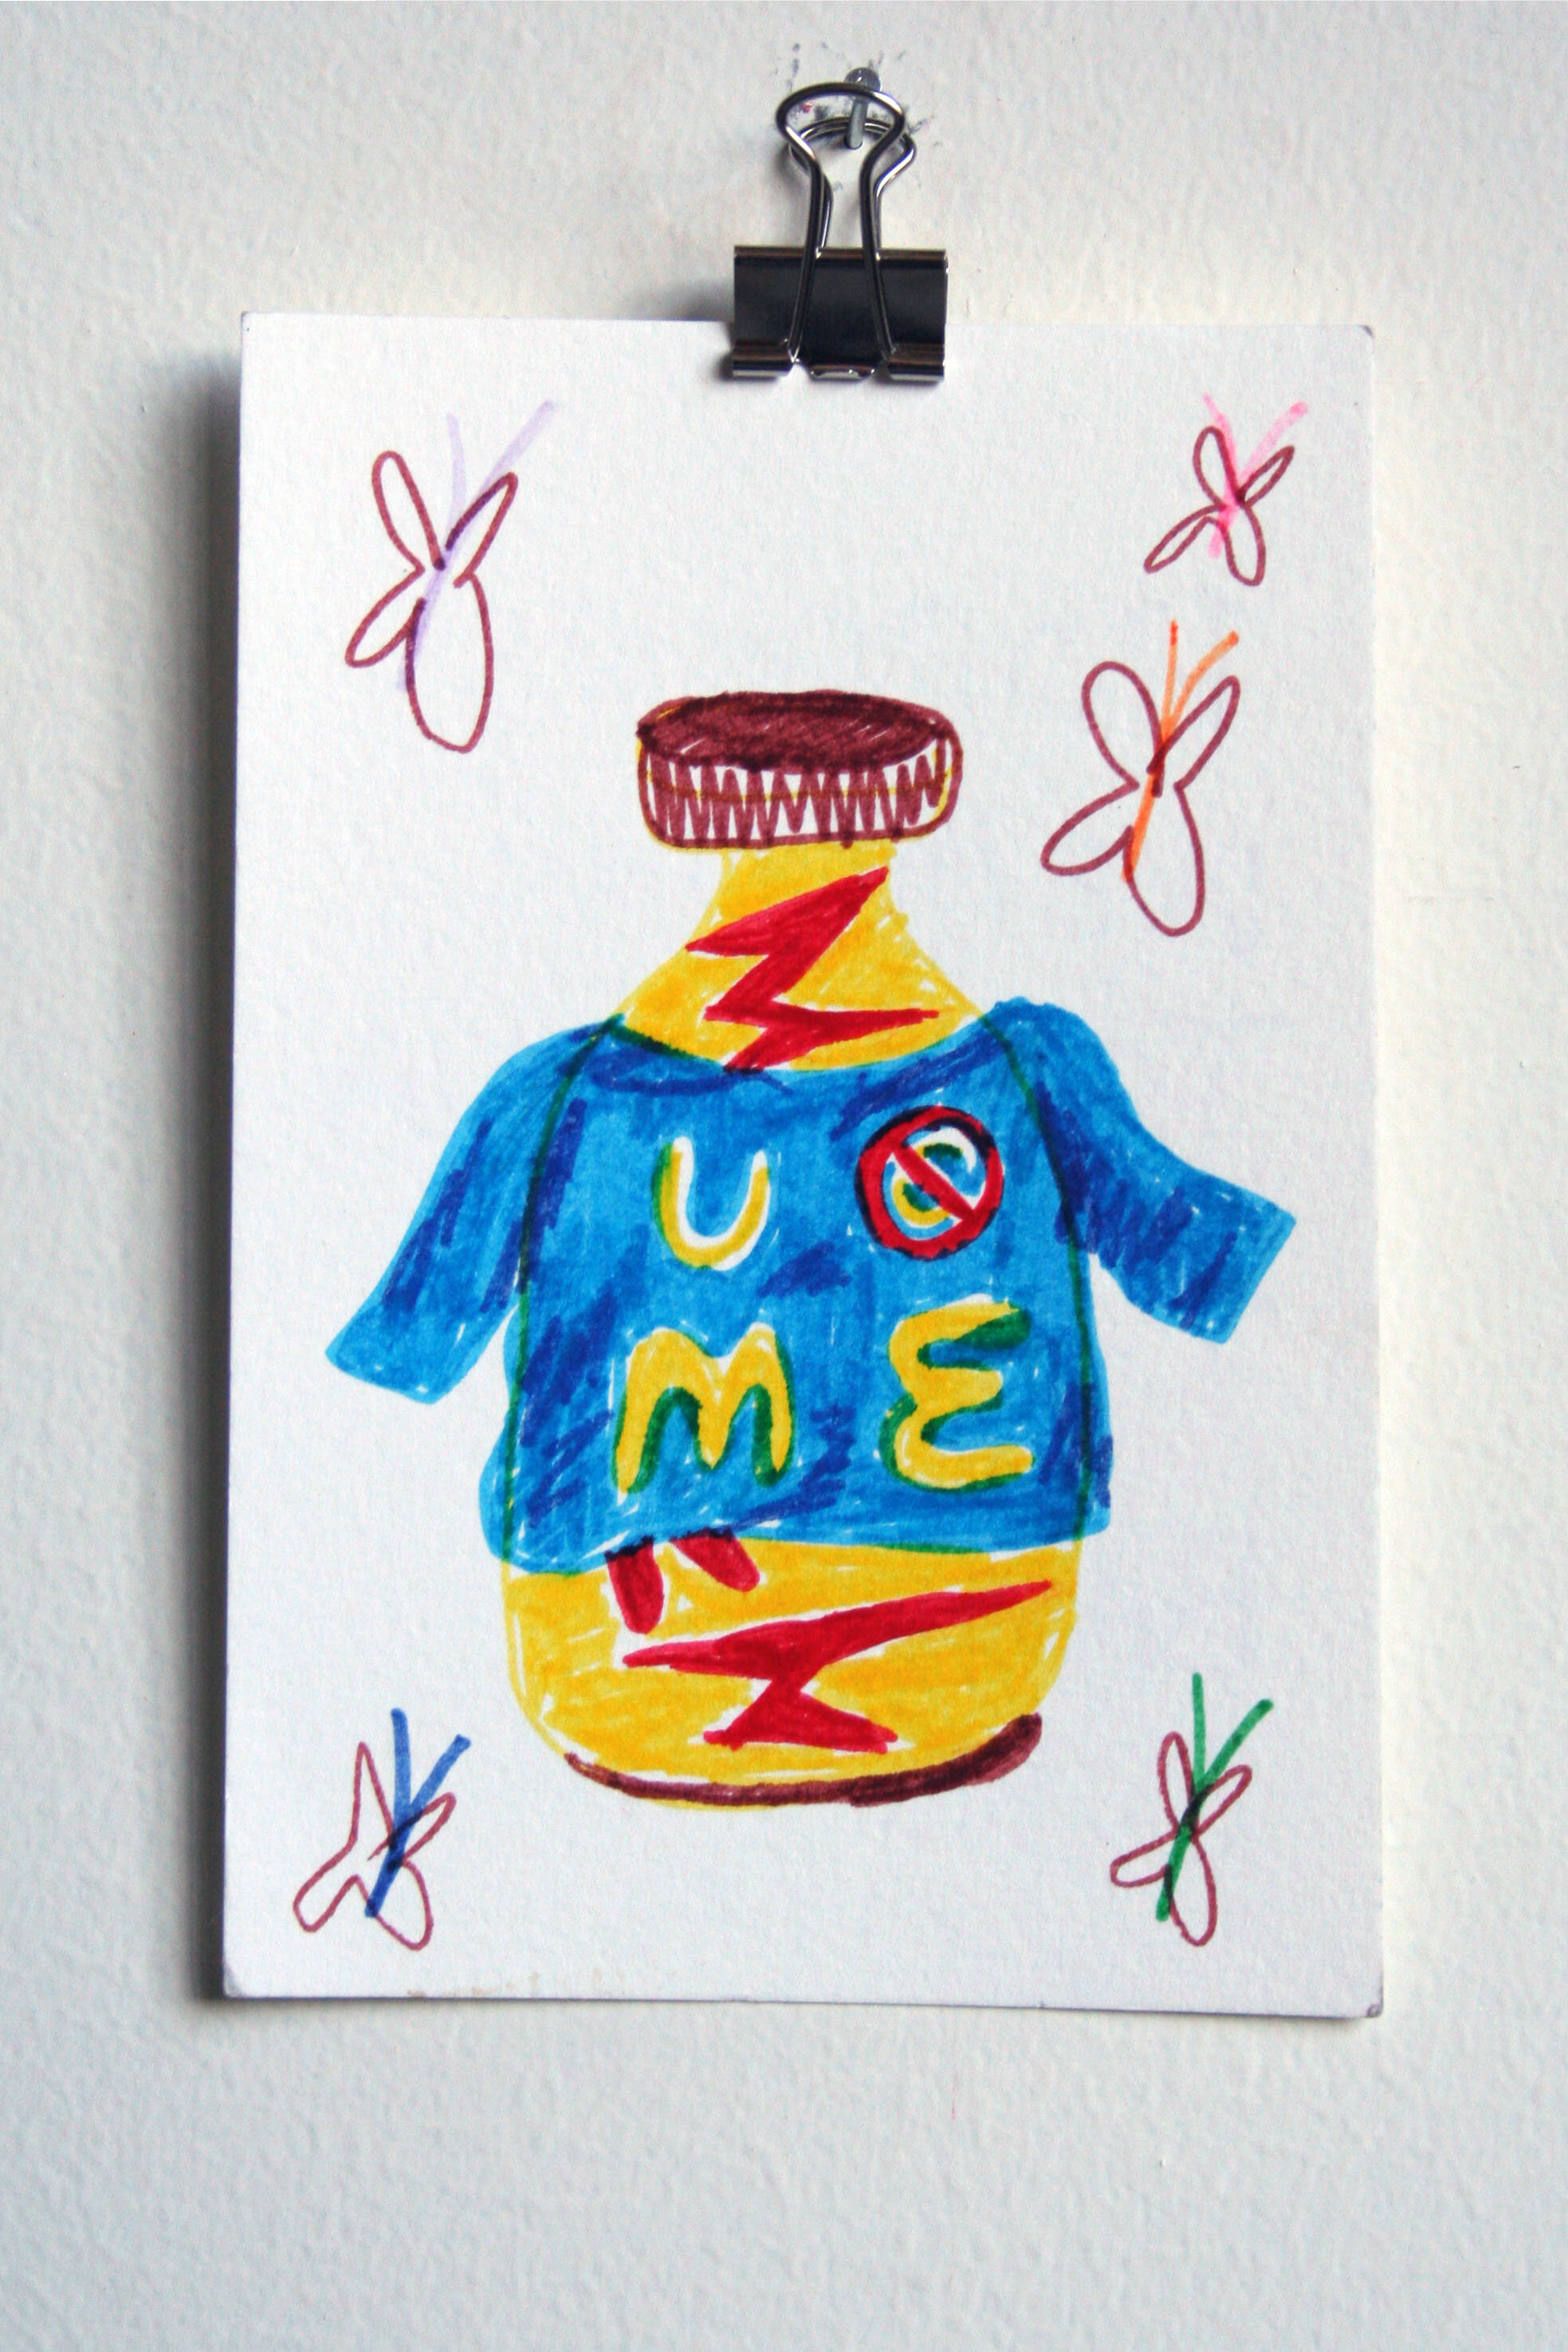   Poppers Wearing John Cena Shirt,  2015  6 x 4 inches (15.24 x 10.16 cm.)  Marker on paper 